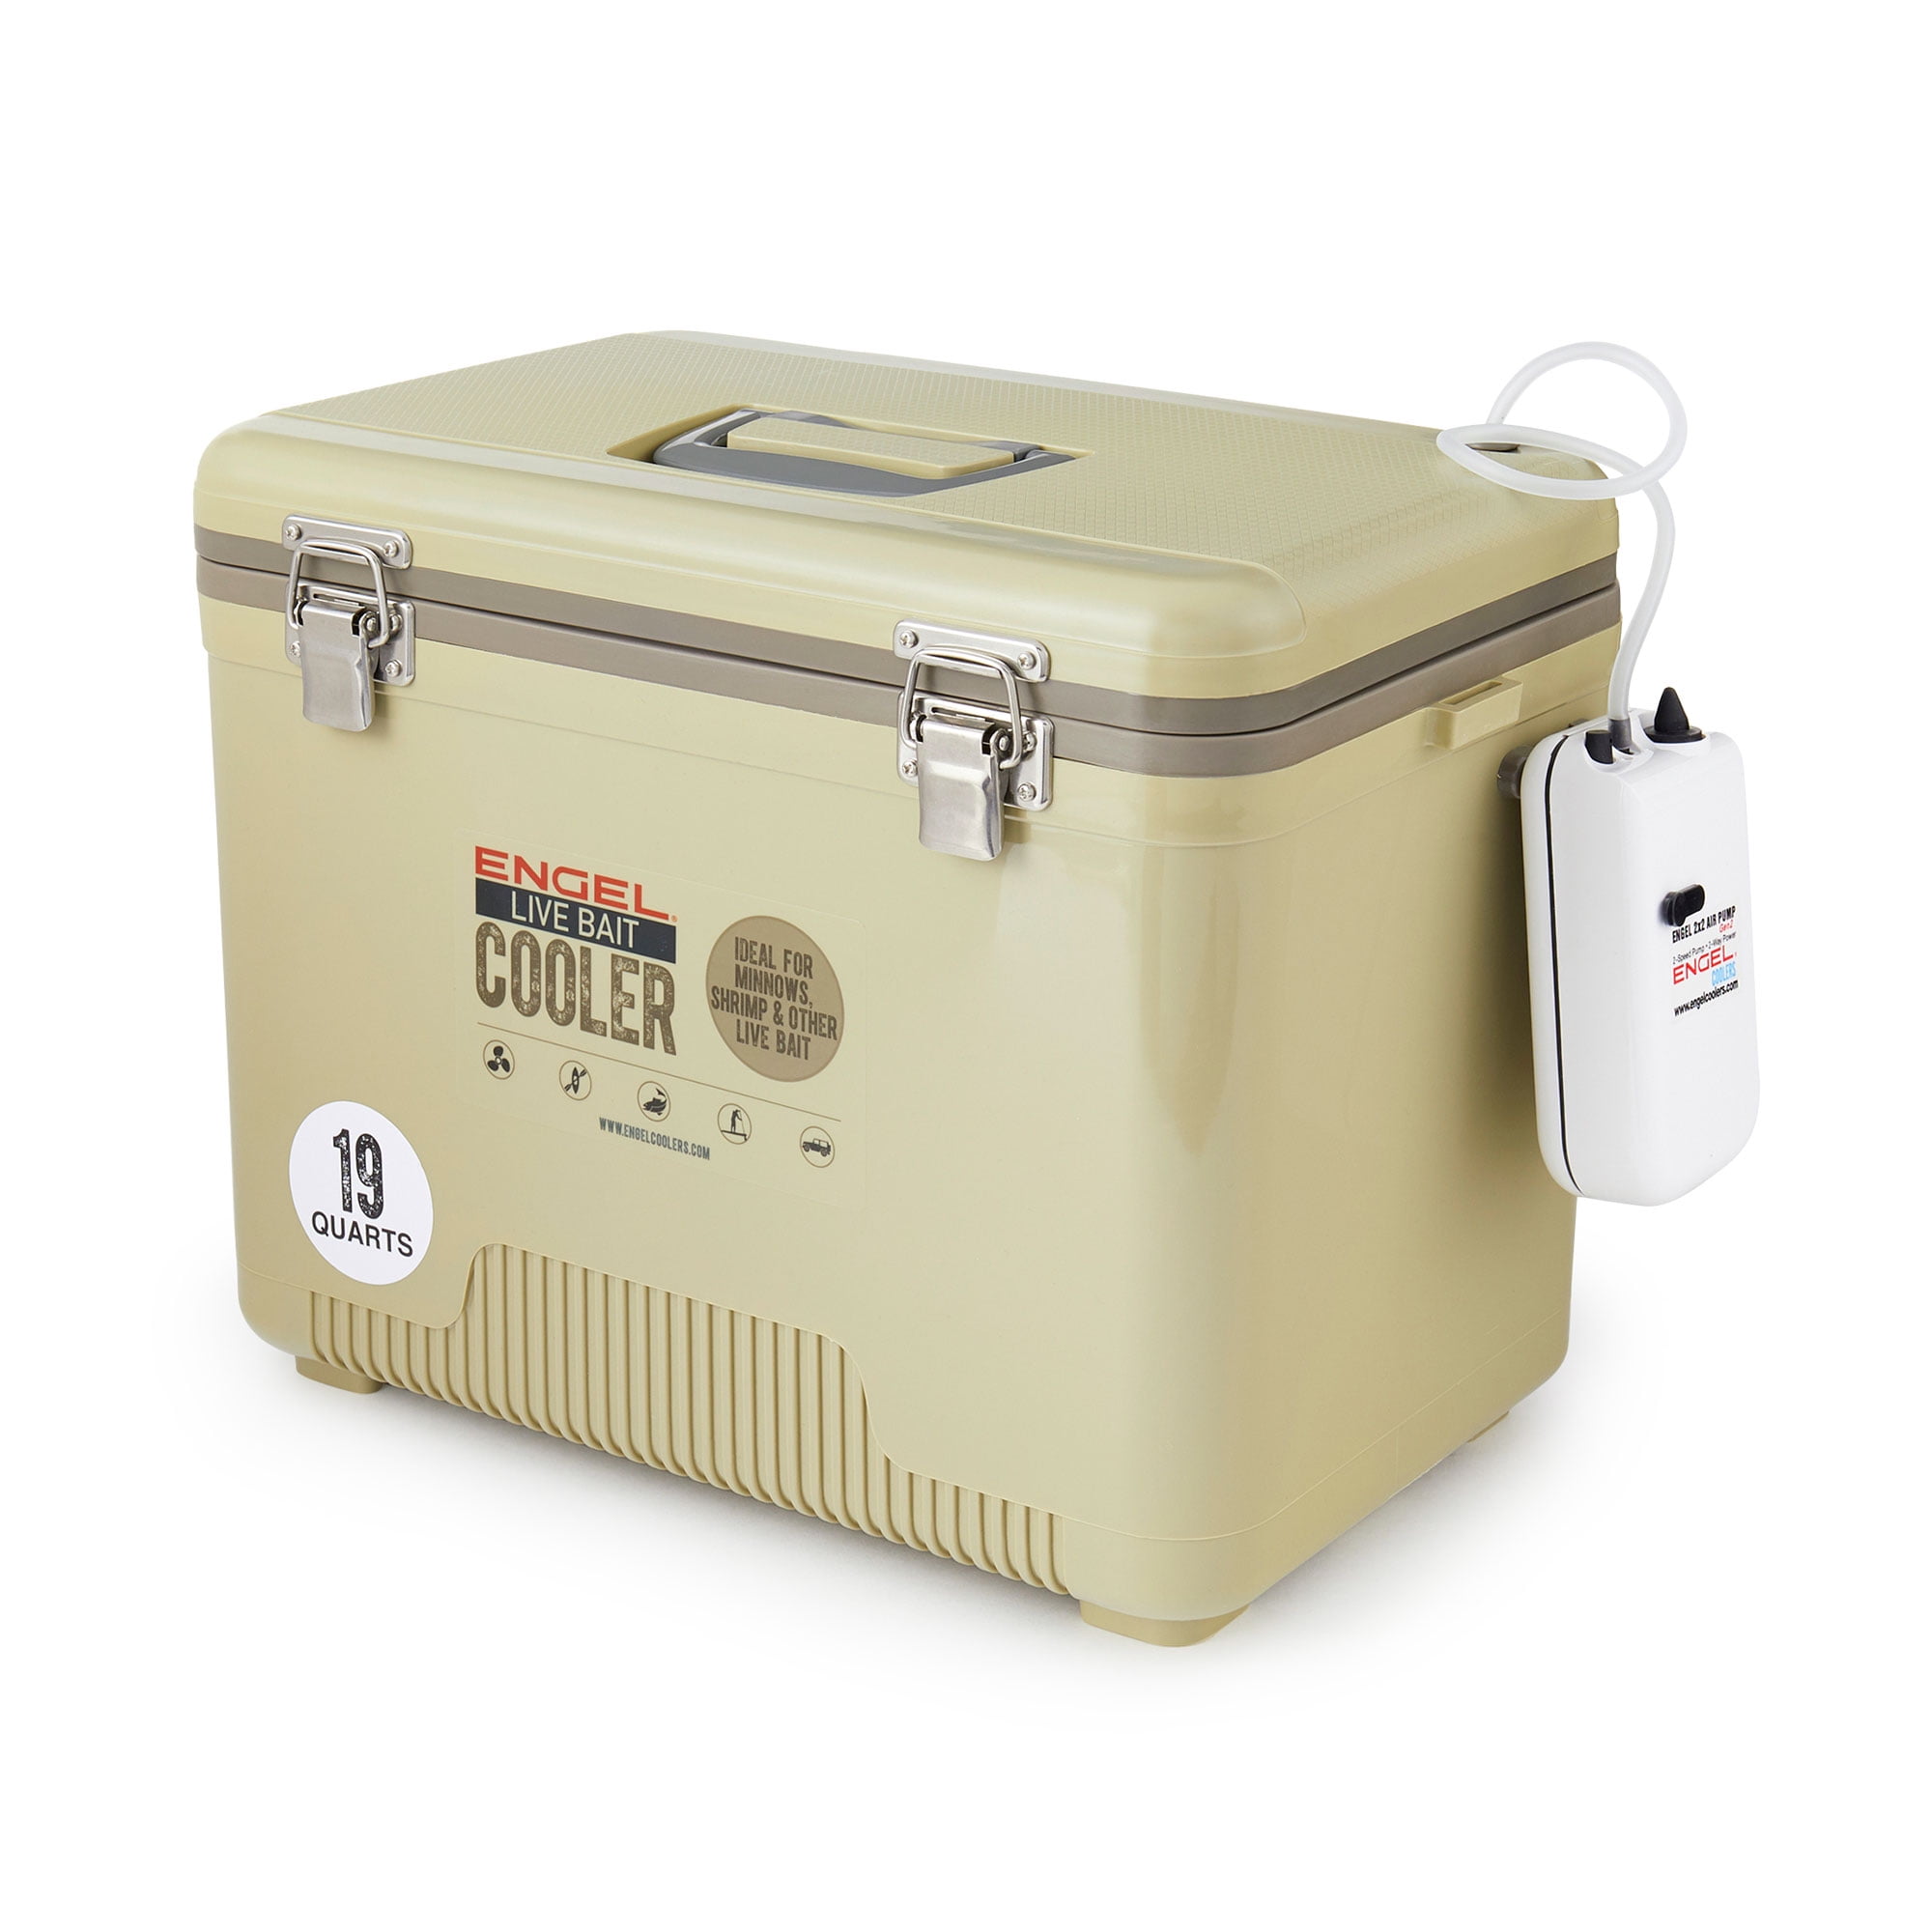 Engel 19 Quart Insulated Live Bait Fishing Dry Box Cooler With